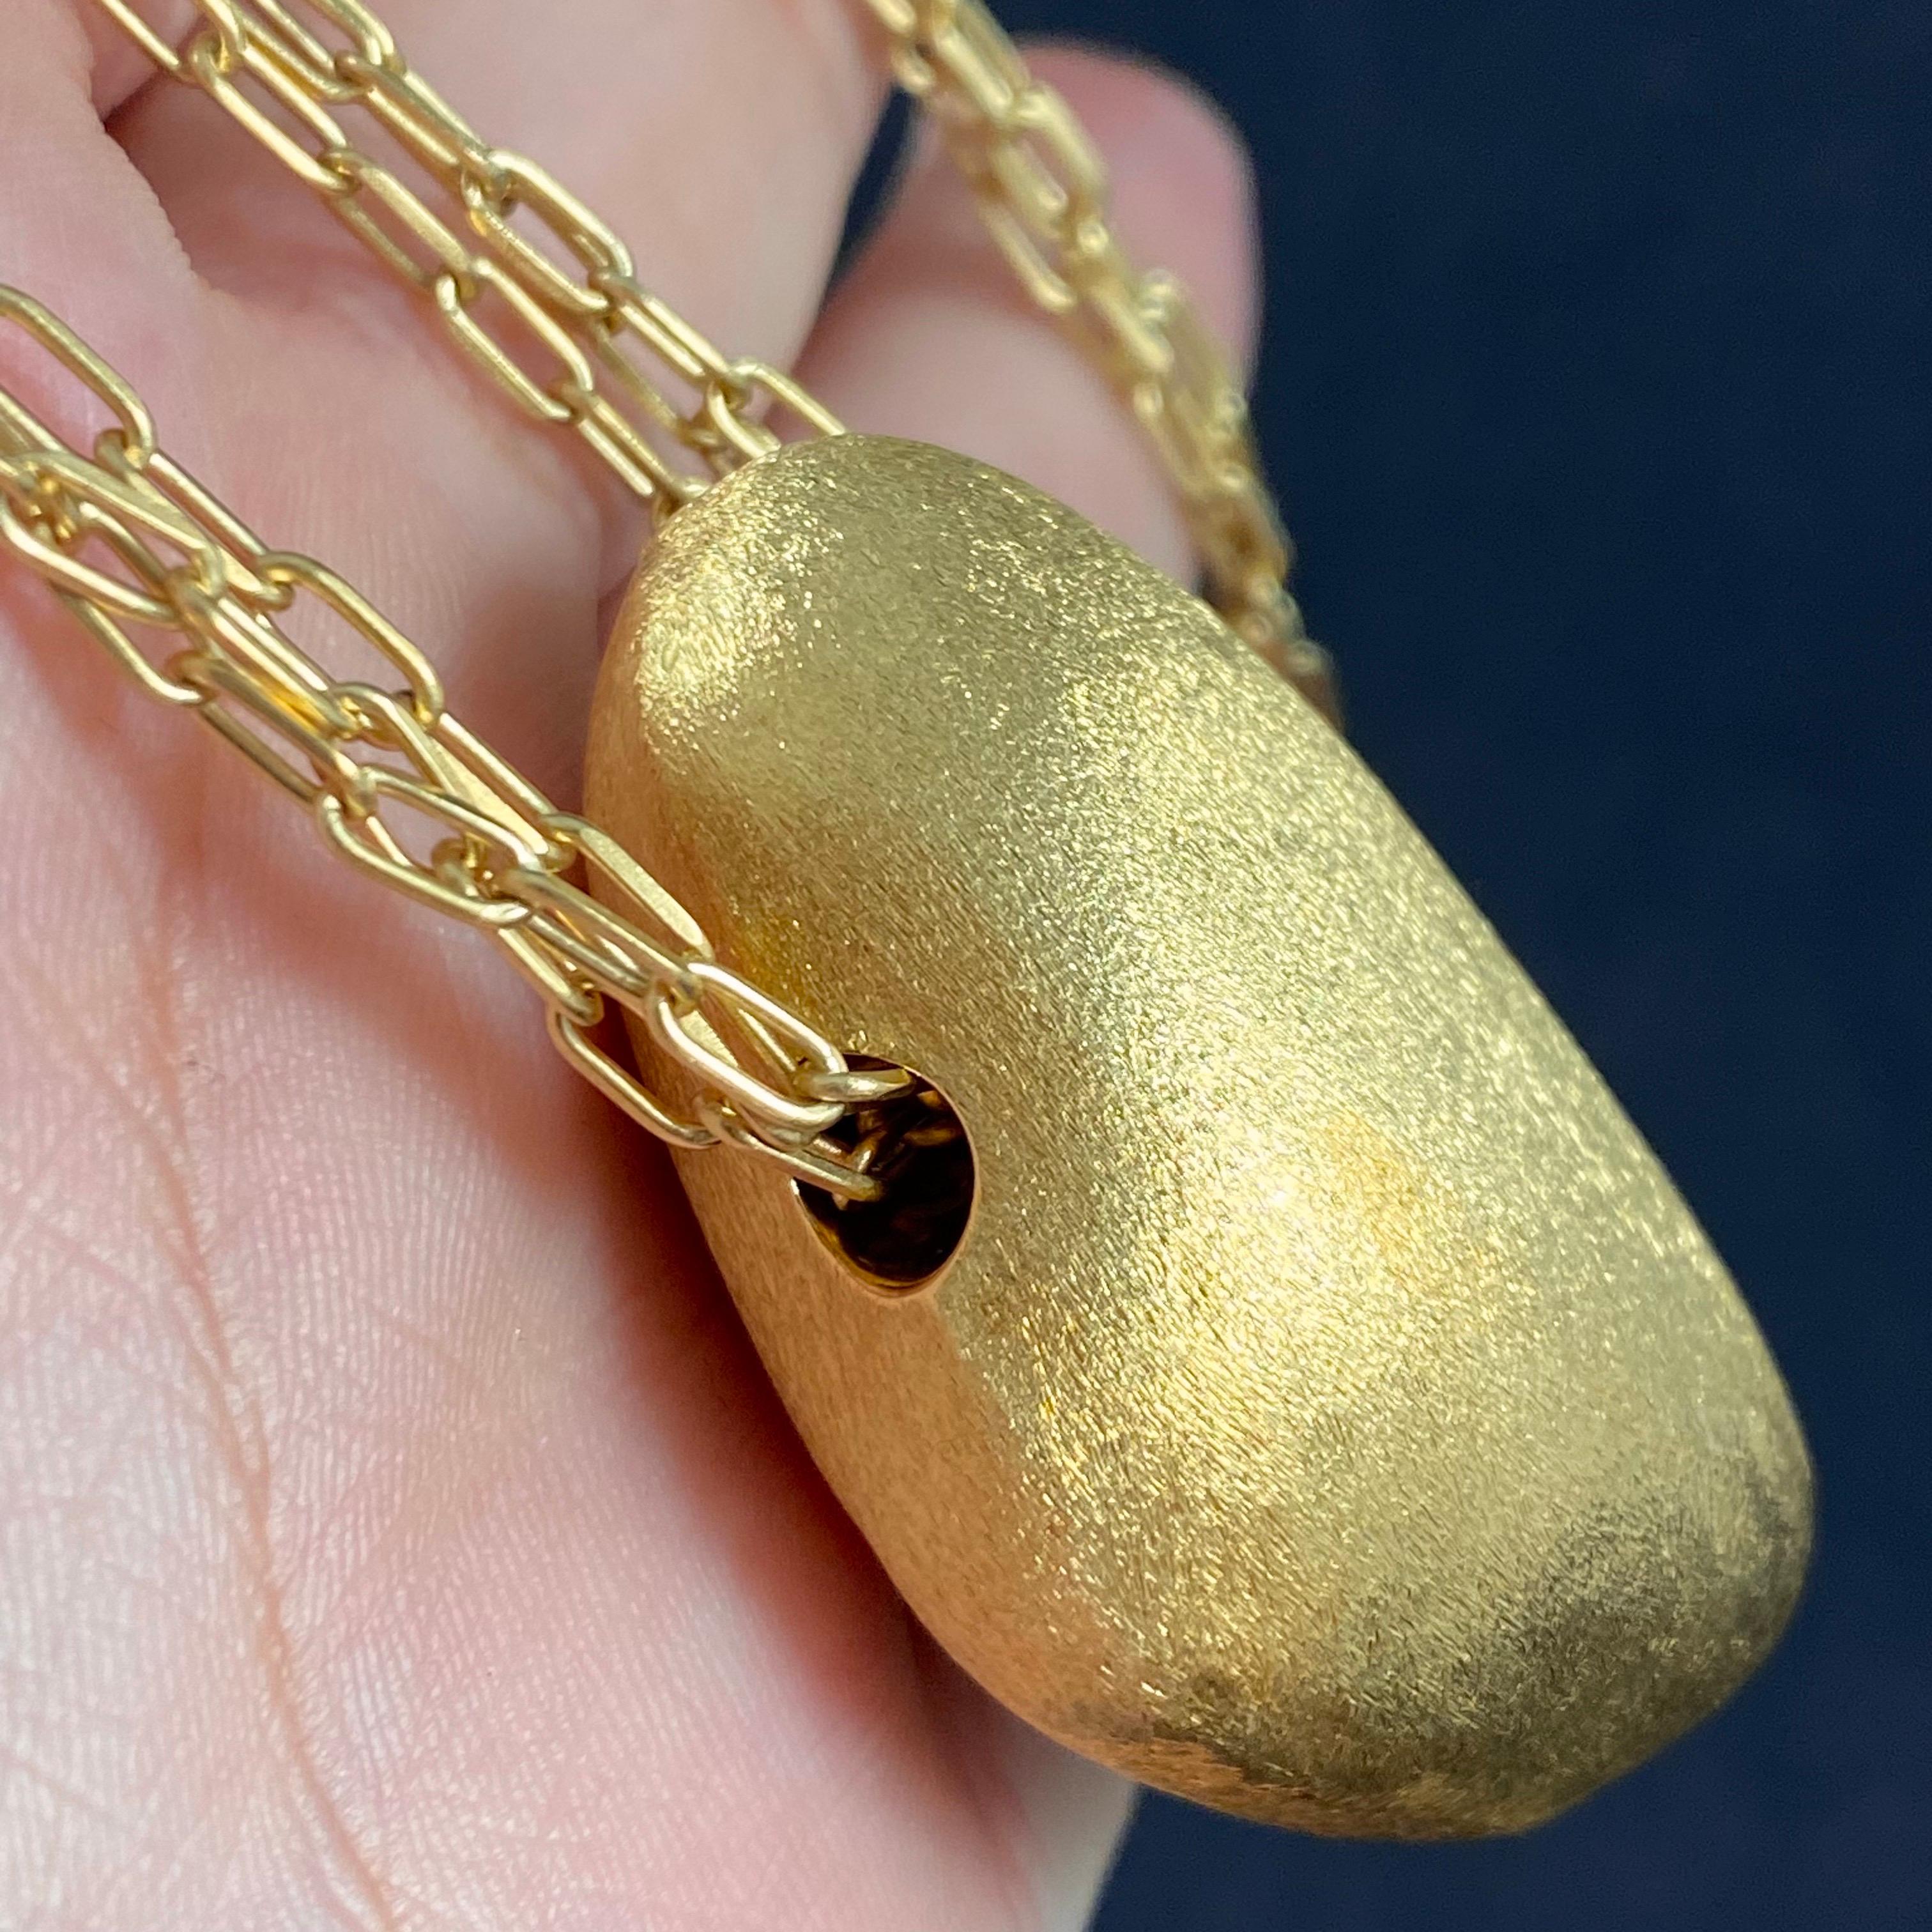 H. Stern Textured Golden Stone Pedras Roladas Maior Pendant Necklace Yellow Gold For Sale 2